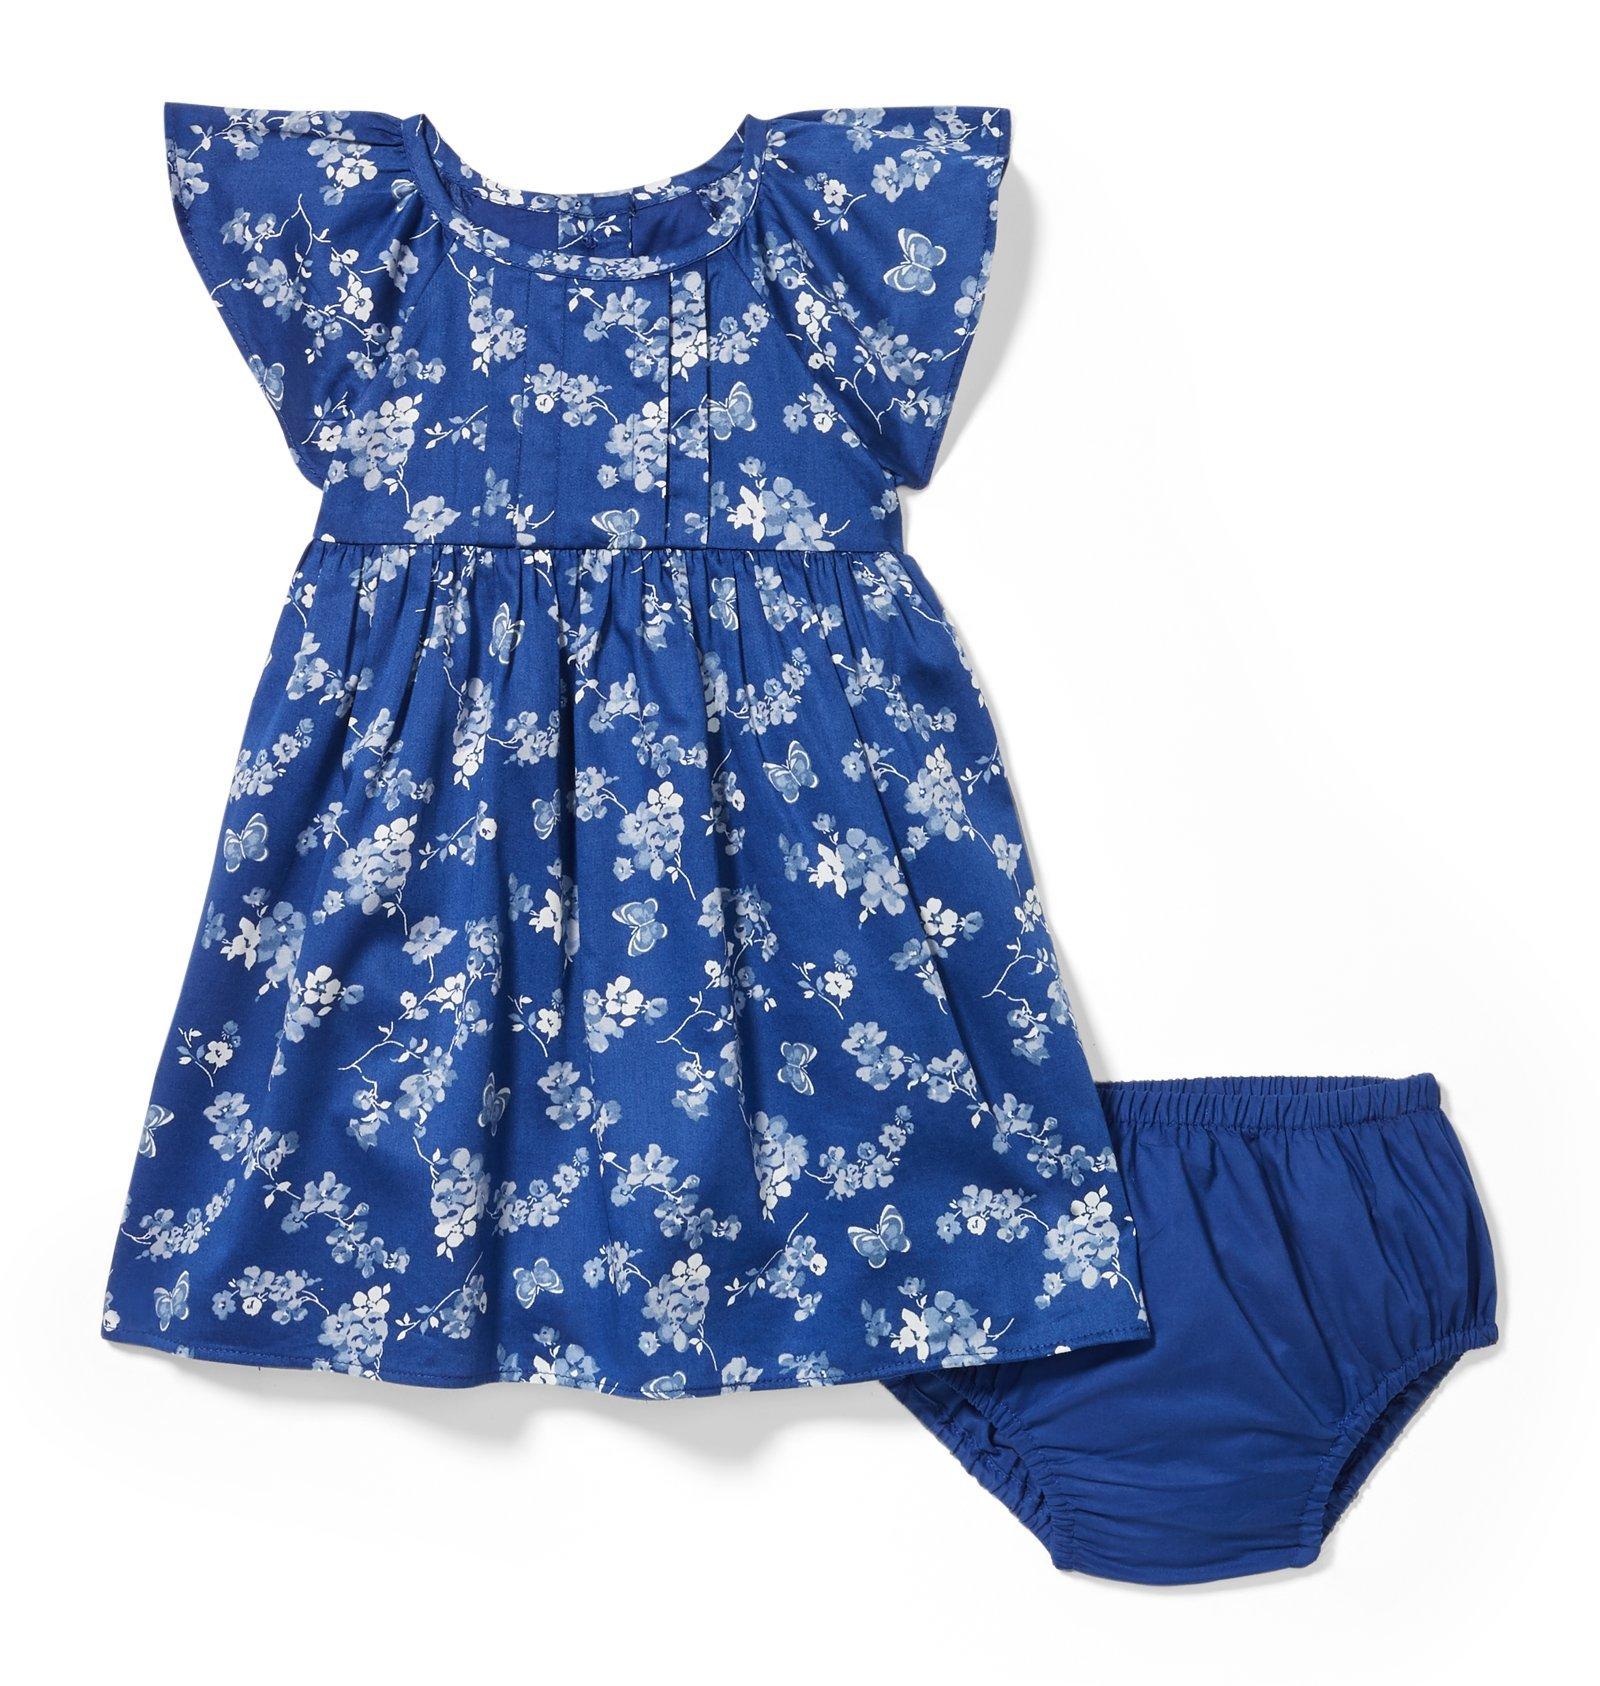 janie and jack floral dress